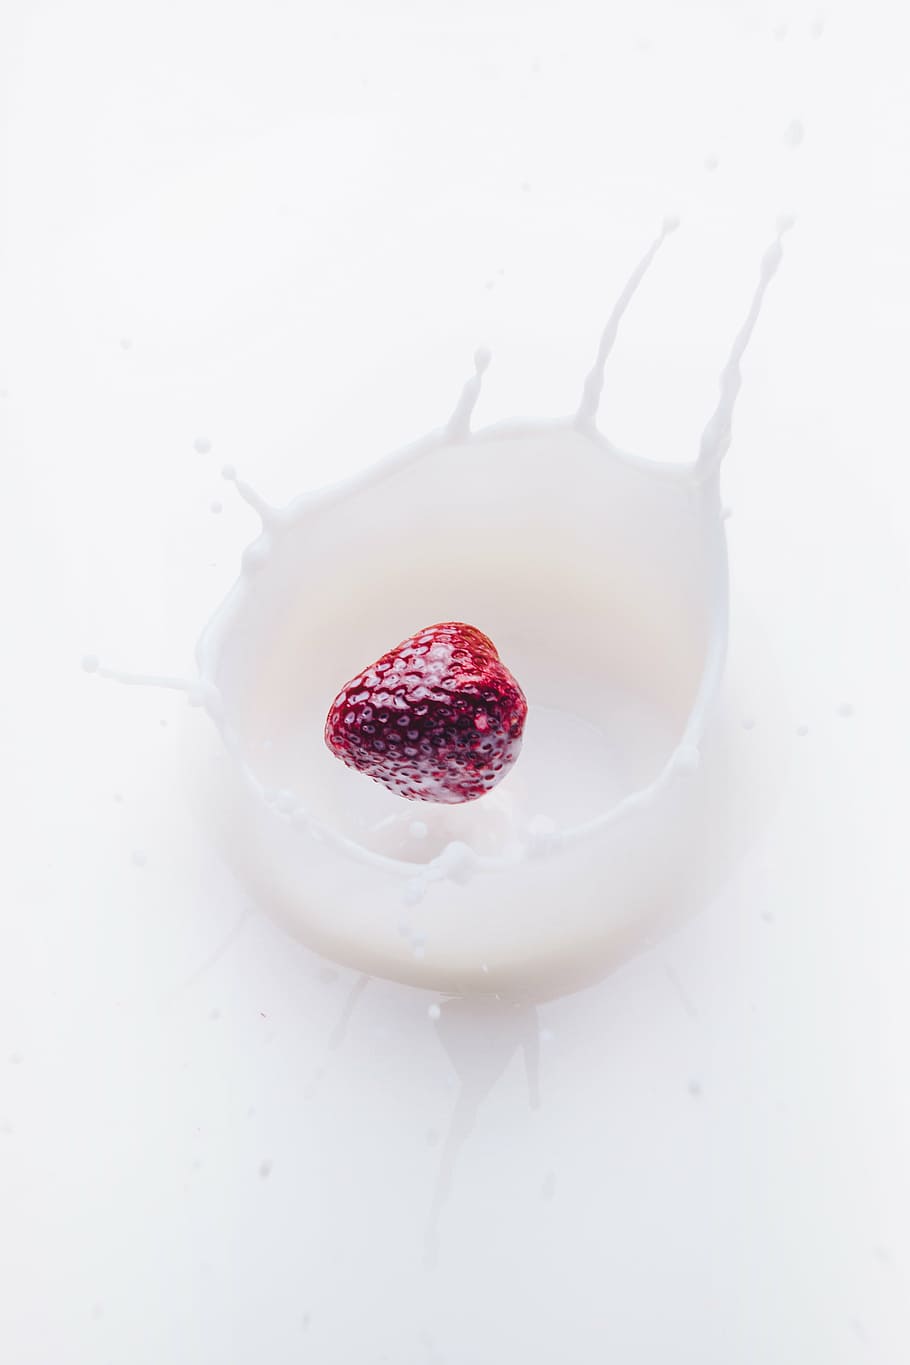 strawberry, milk photography, fruit, dropping, white, liquid, milk, food, food and drink, berry fruit